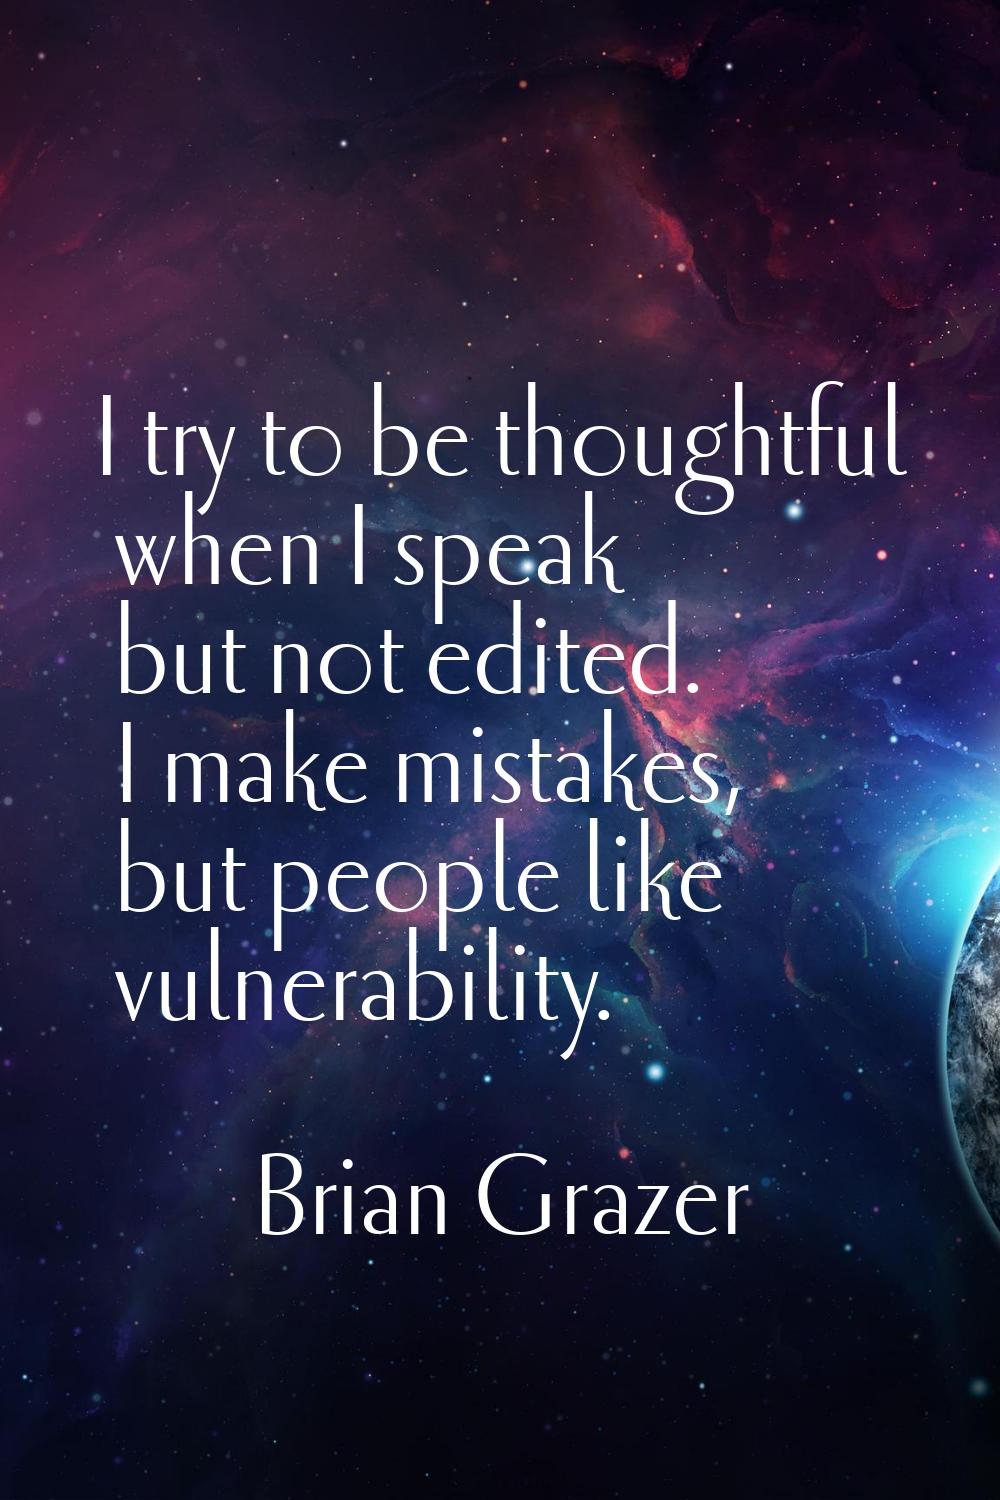 I try to be thoughtful when I speak but not edited. I make mistakes, but people like vulnerability.